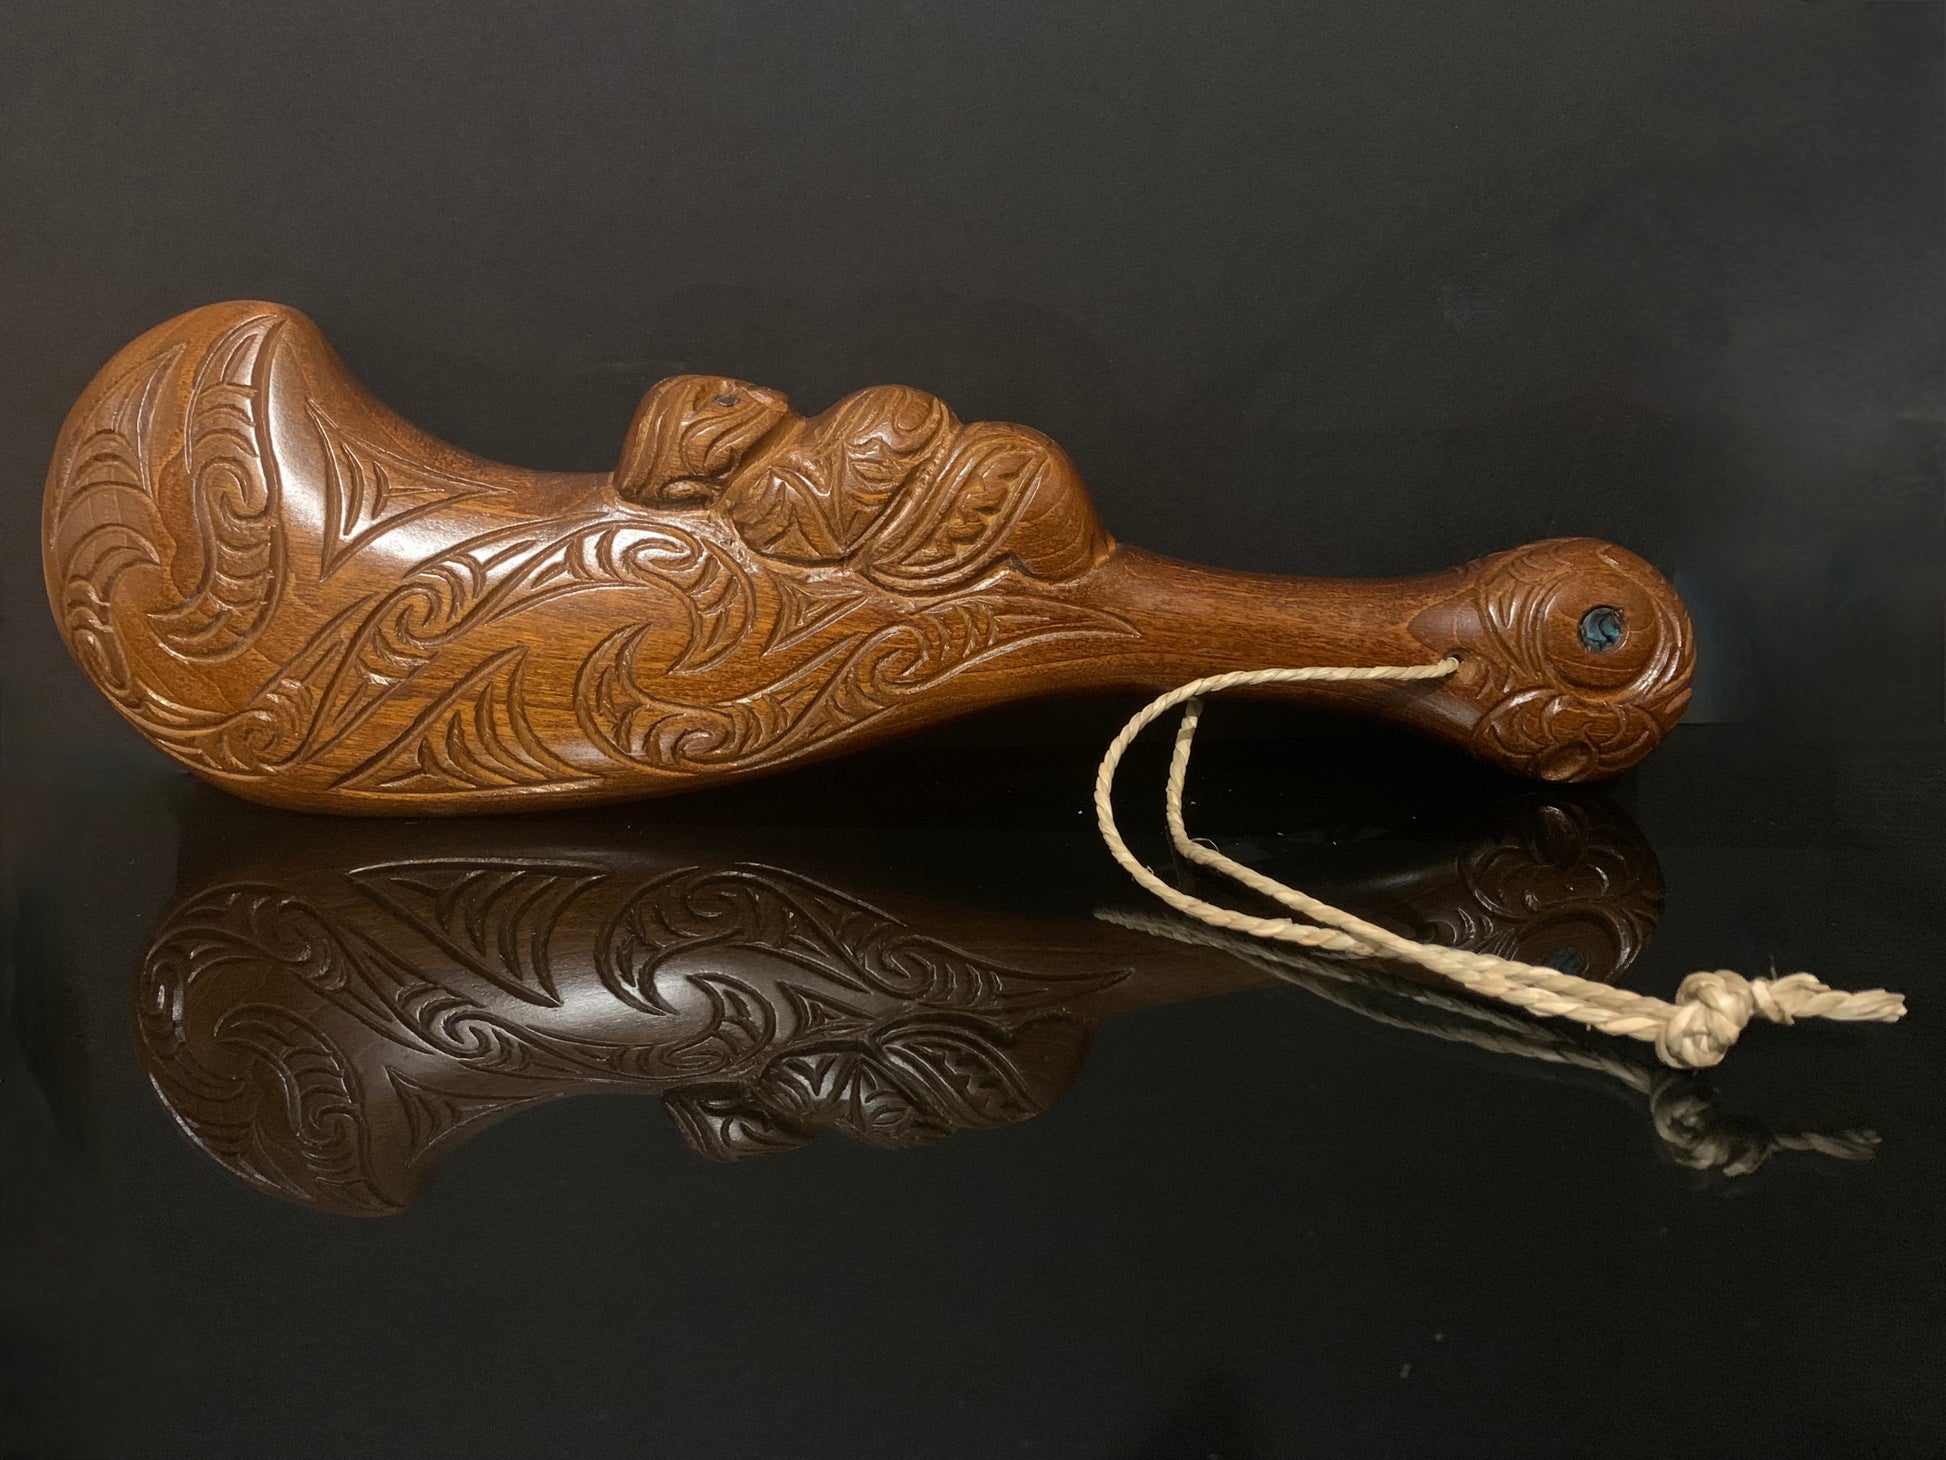 Maori wood wahaika weapon carved in New Zealand and available from Silver Fern Gallery